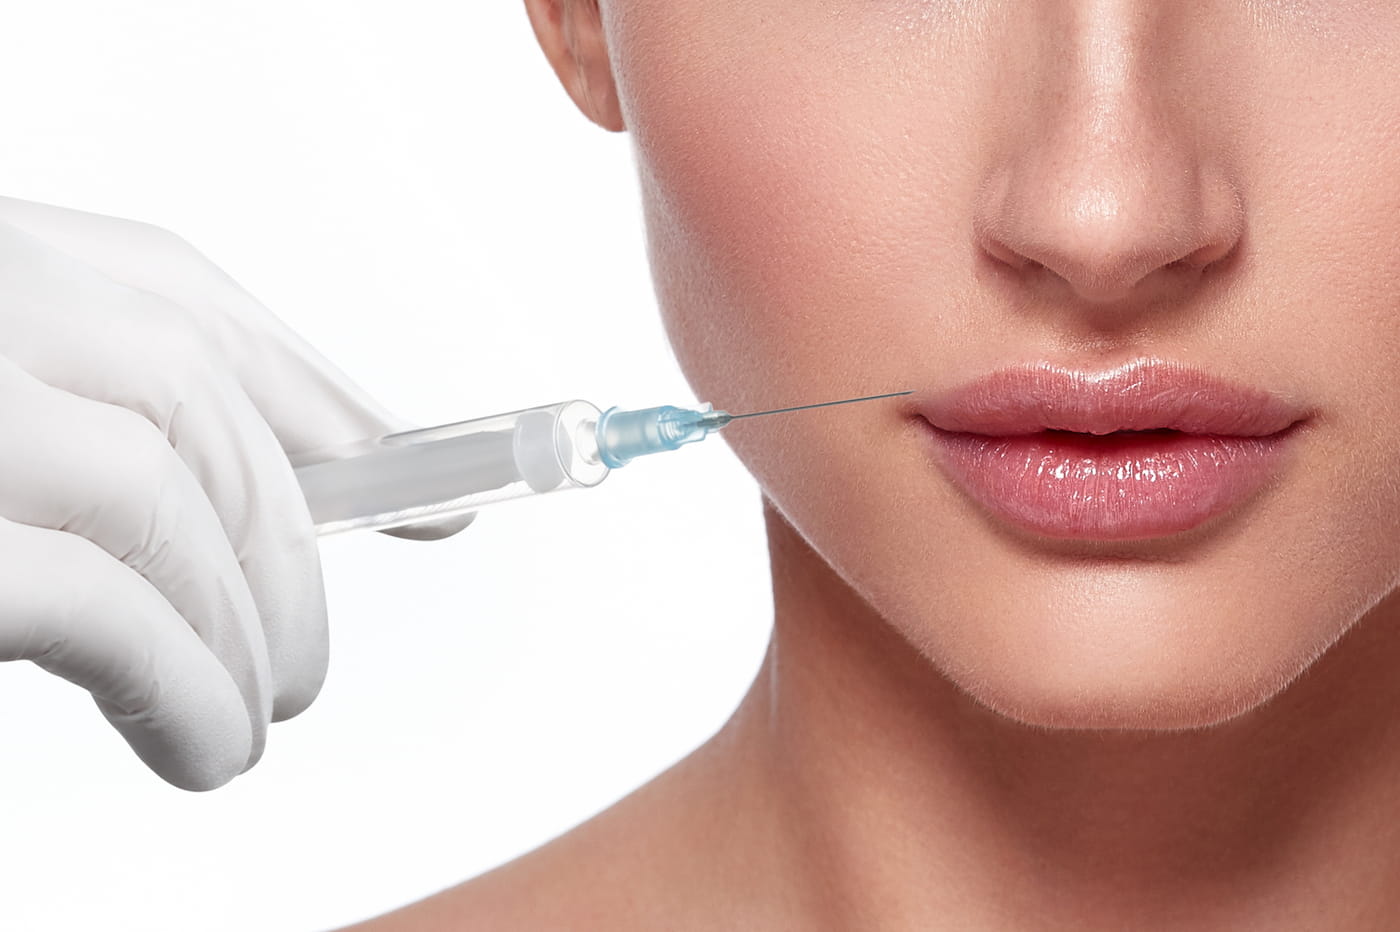 Lip Filler Migration: Why It Happens and Ways To Prevent It